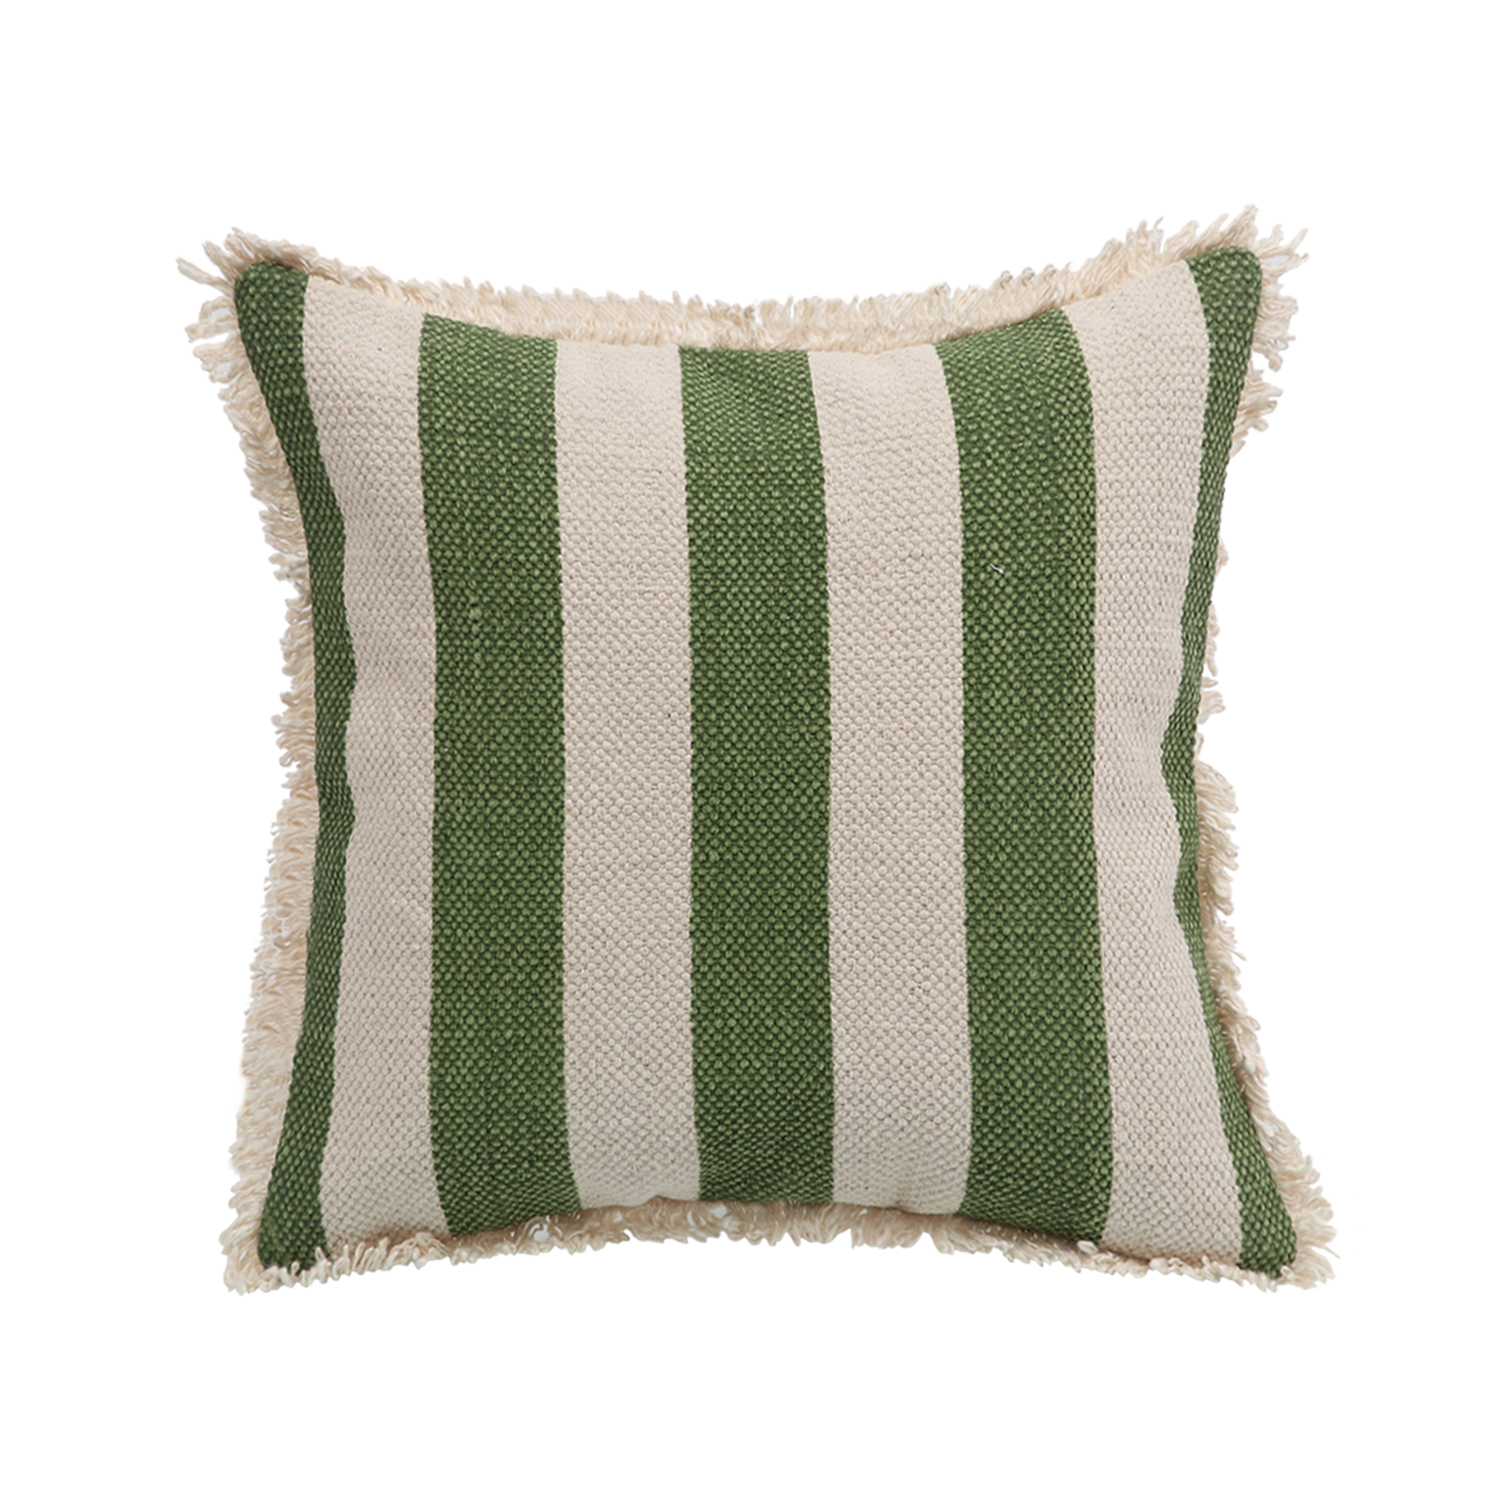 Printed Stripe Light Green  Cushions Covers with fringes 14X14 Inch